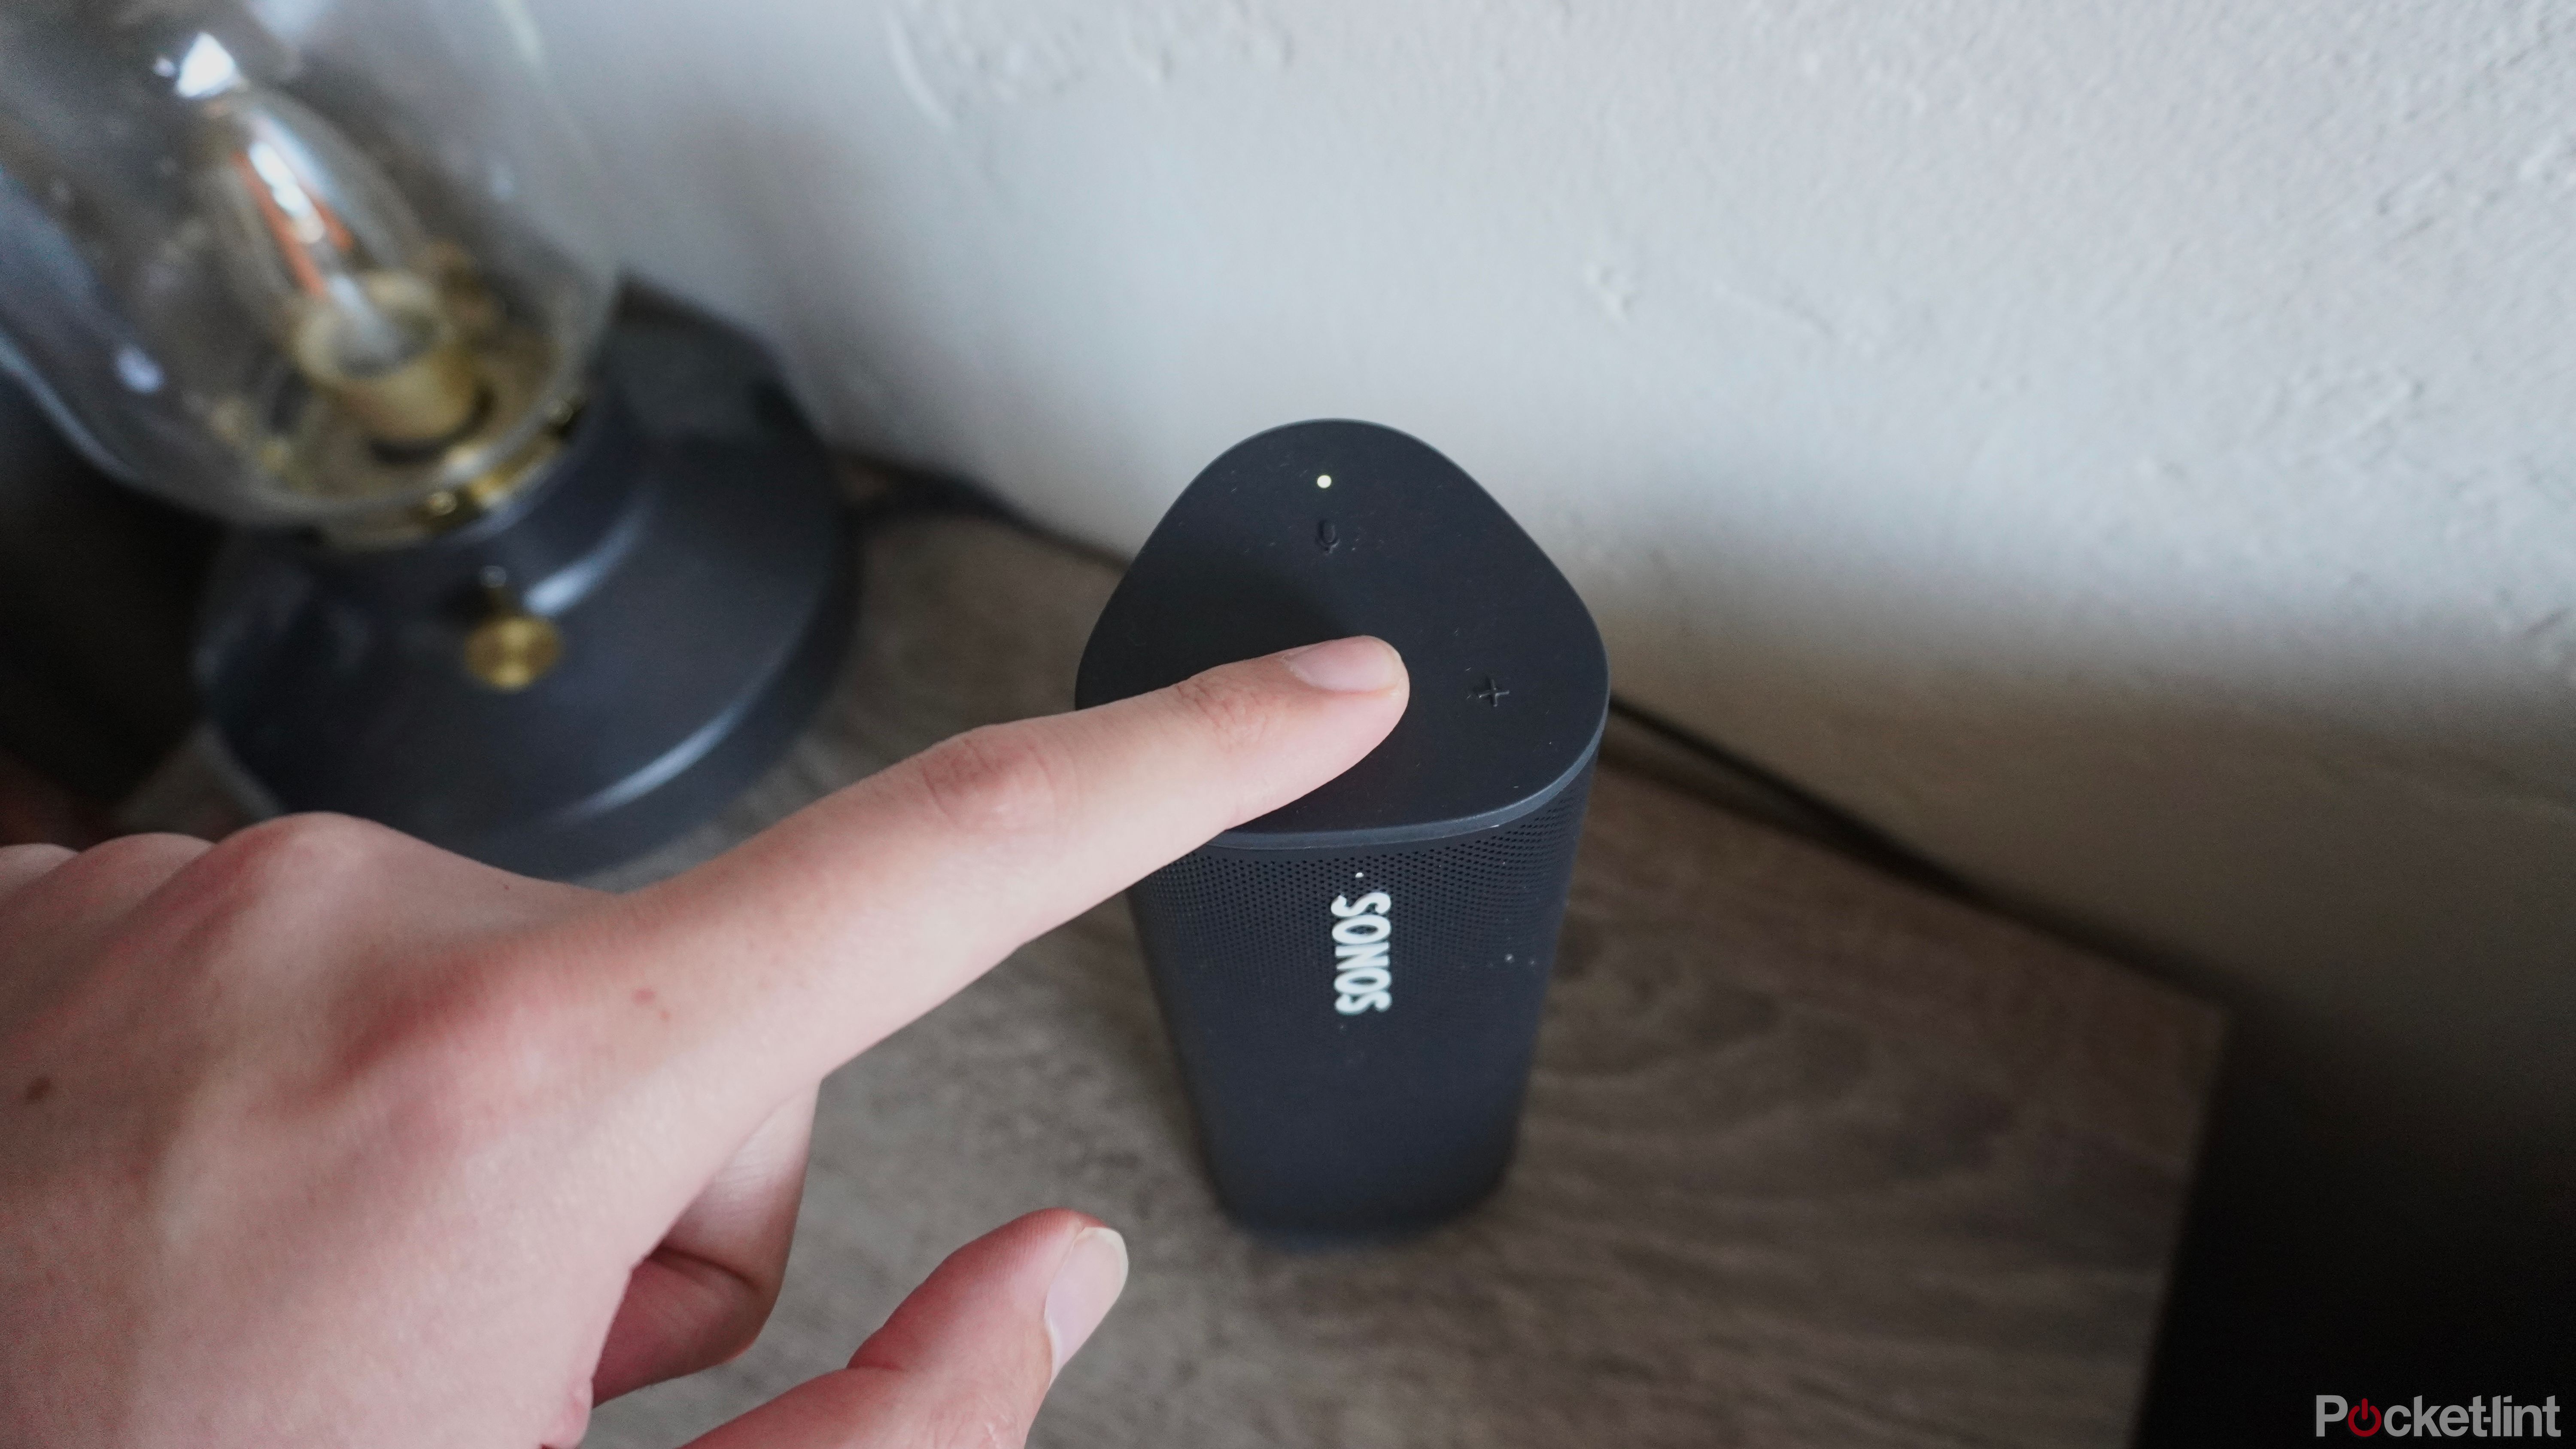 Pressing the Play/Pause button on a Sonos Roam speaker.